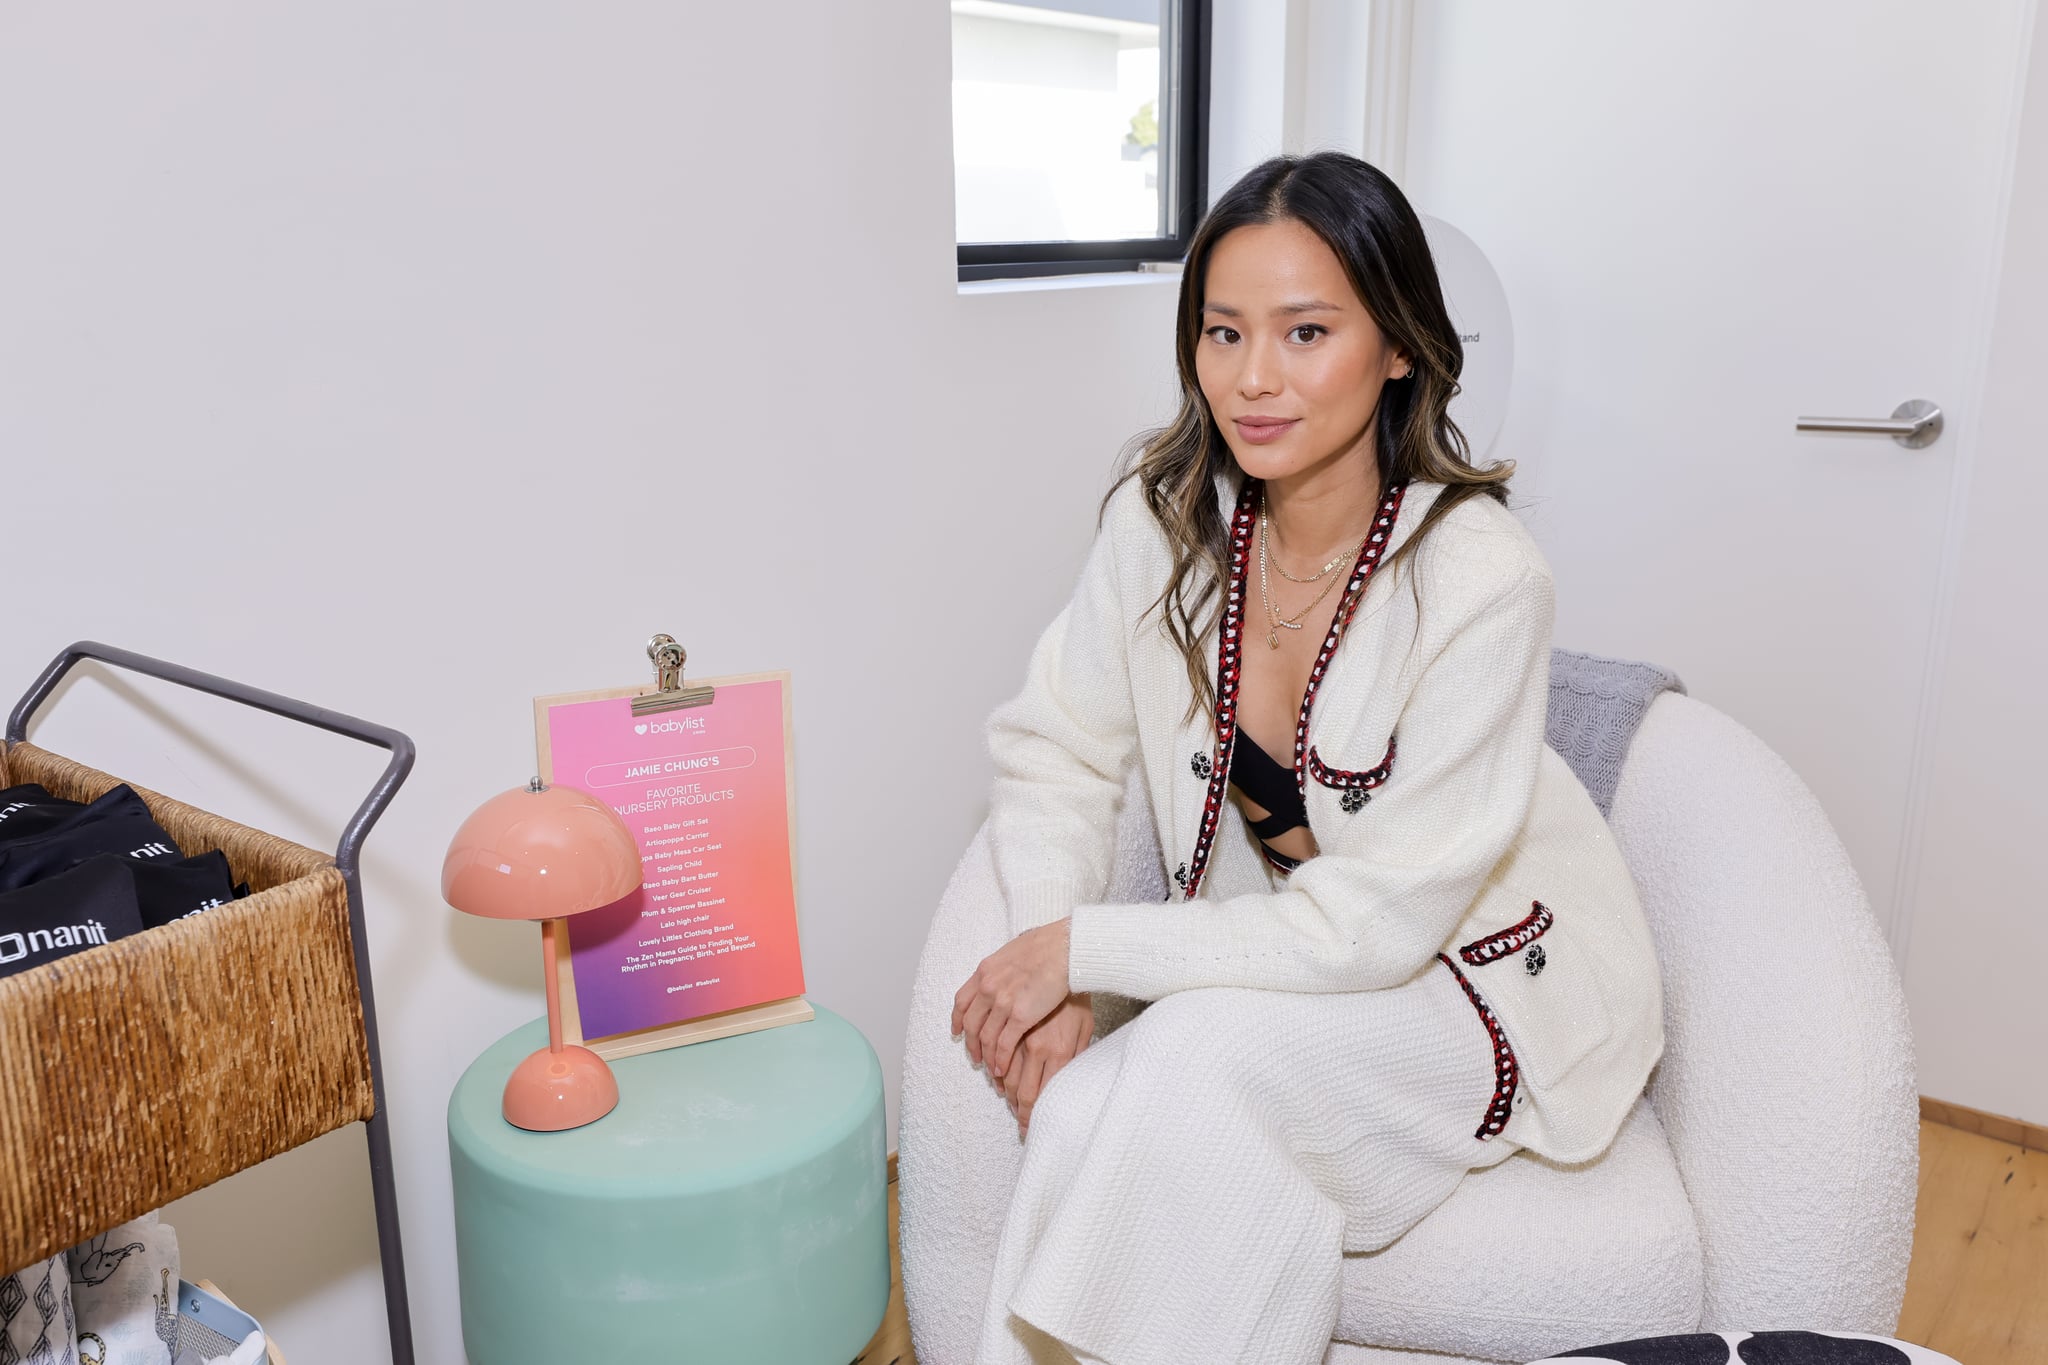 LOS ANGELES, CALIFORNIA - JANUARY 14: Jamie Chung attends Babylist Cribs on January 14, 2022 in Los Angeles, California. (Photo by Matt Winkelmeyer/Getty Images for Babylist)